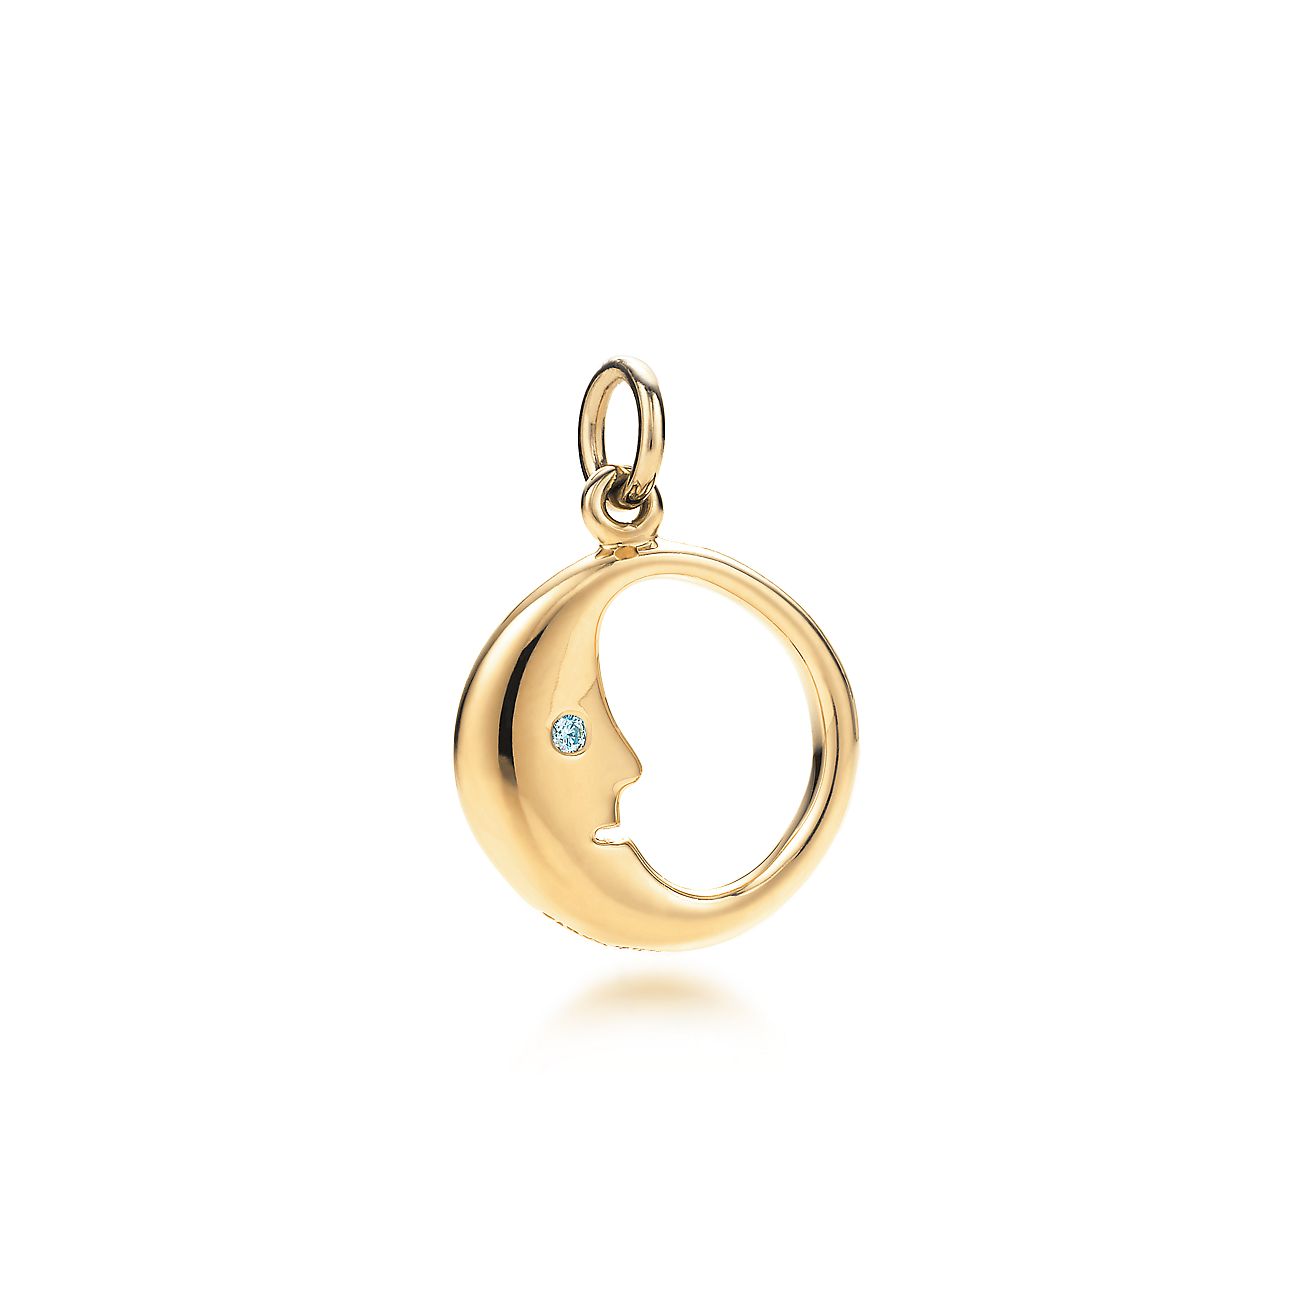 Man in the Moon charm in 18k gold with 